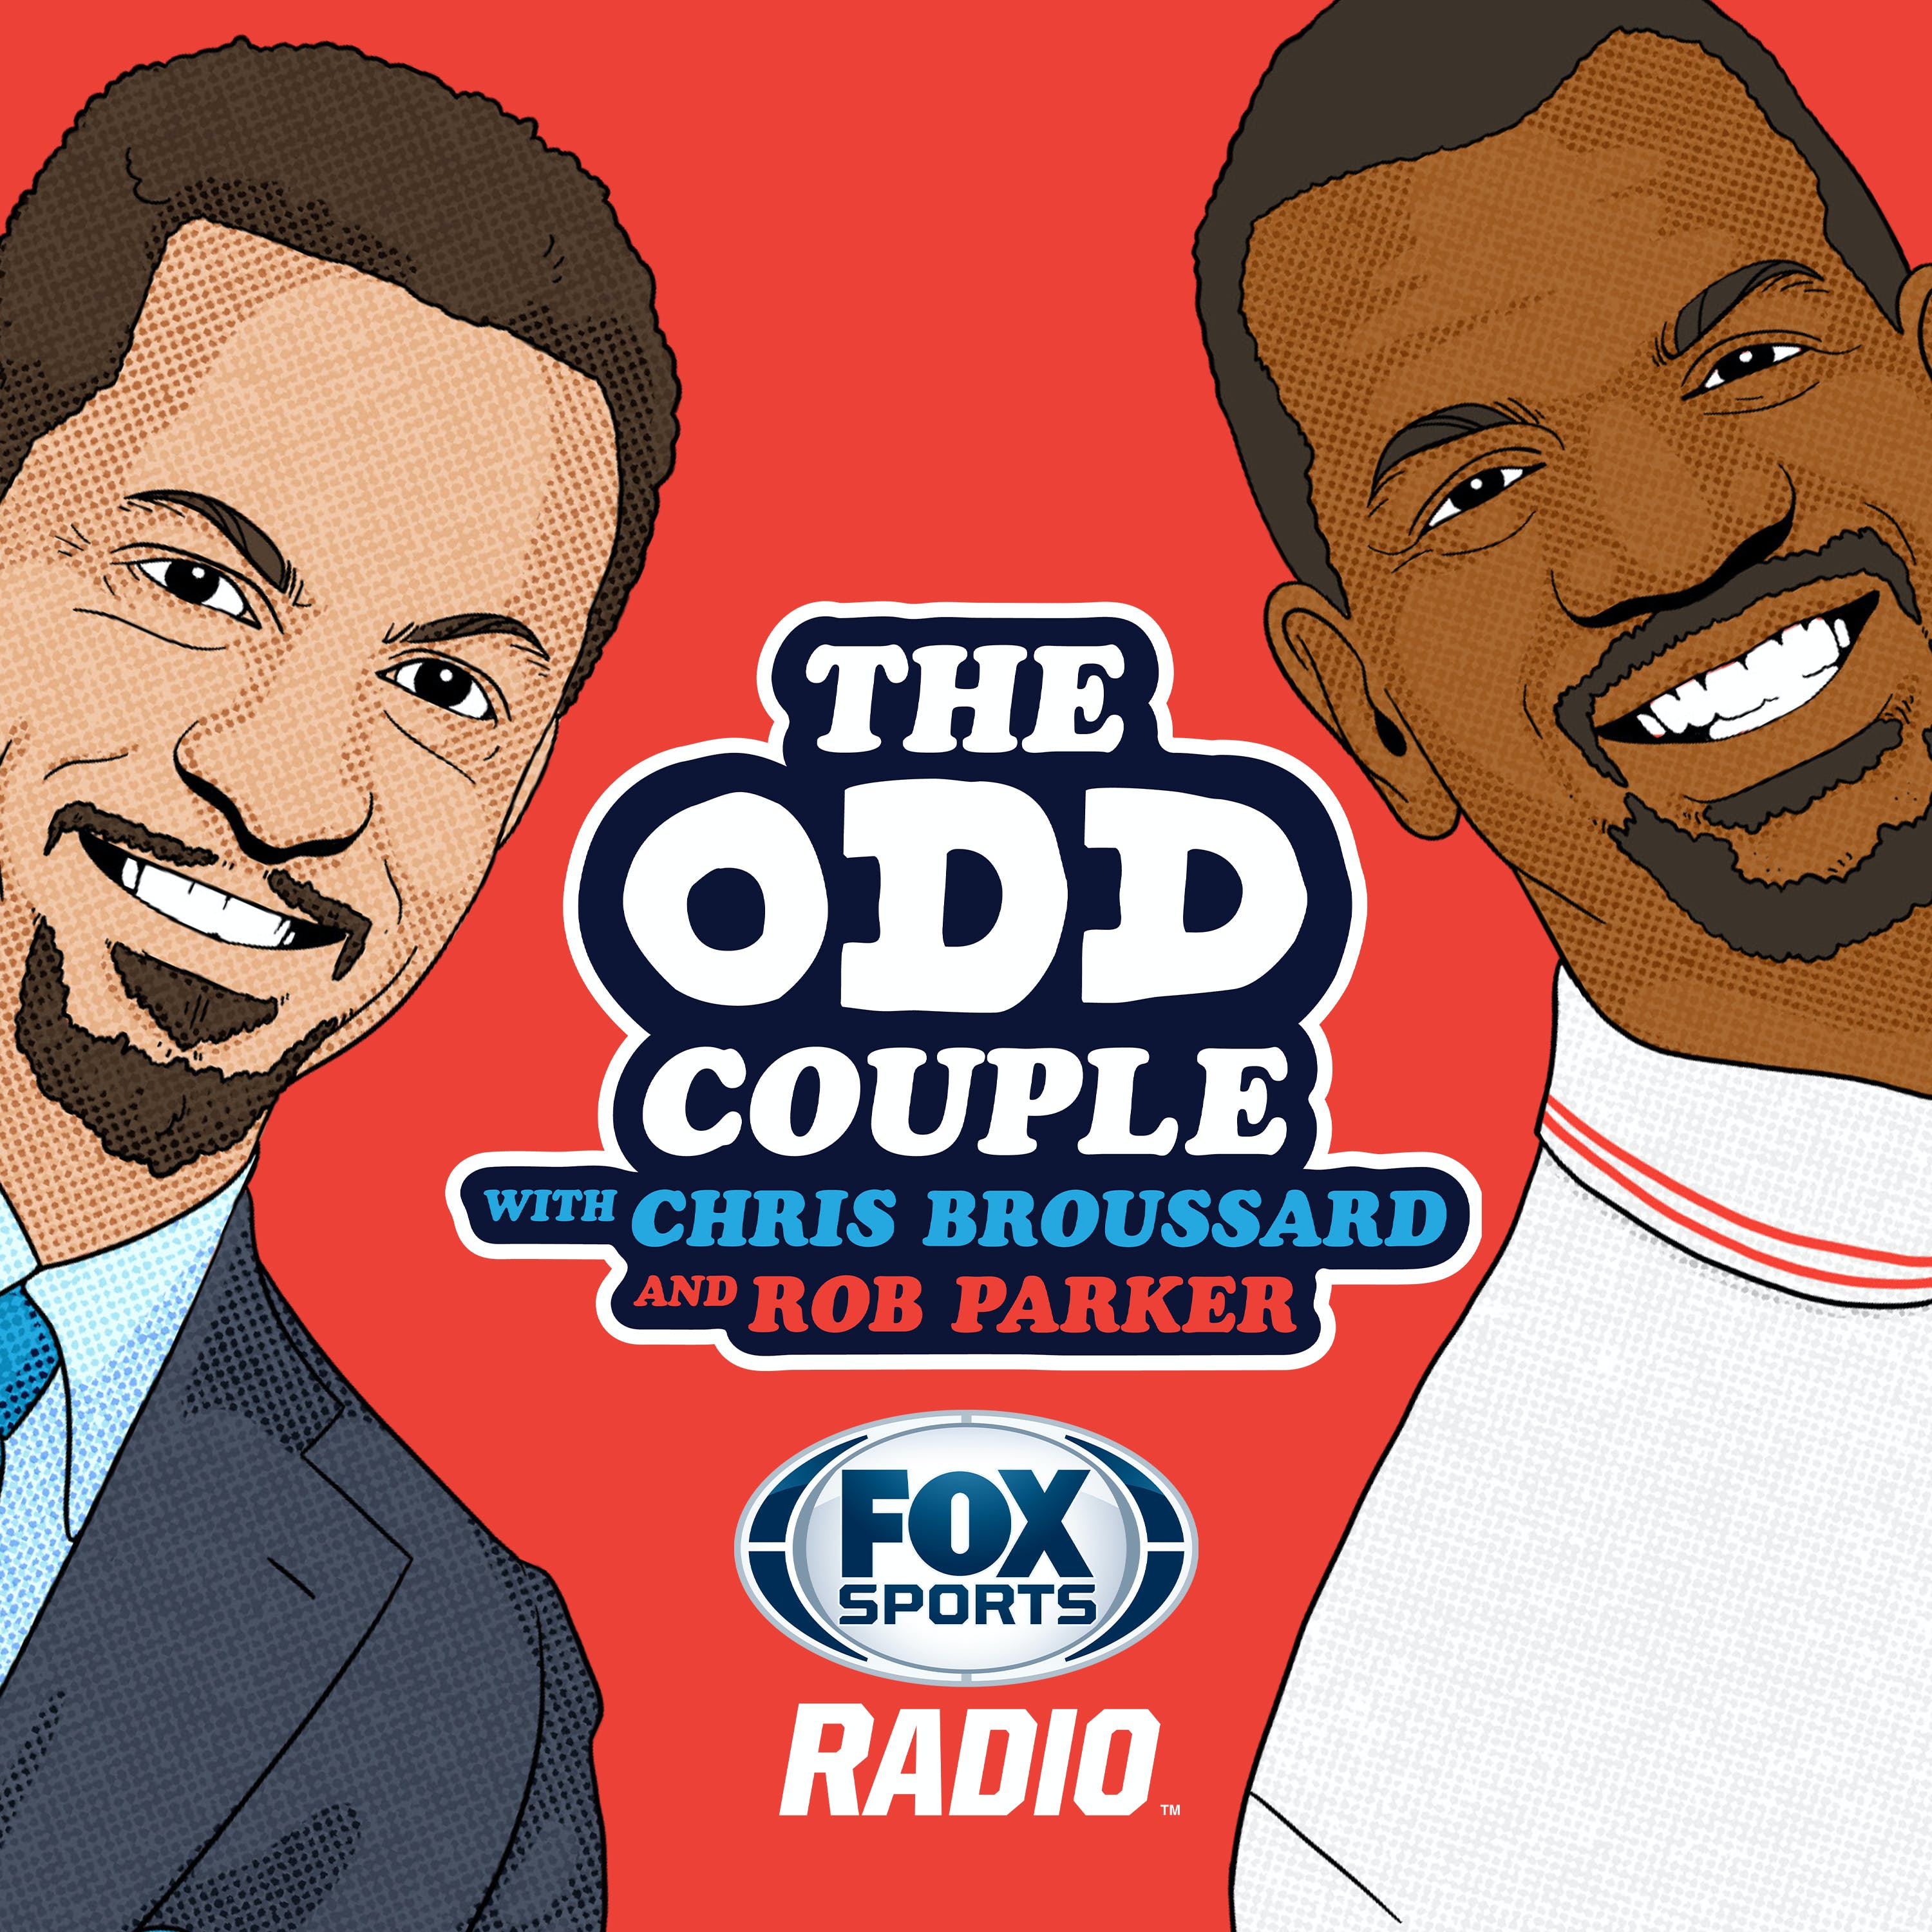 11/27/2020 - Best of The Odd Couple